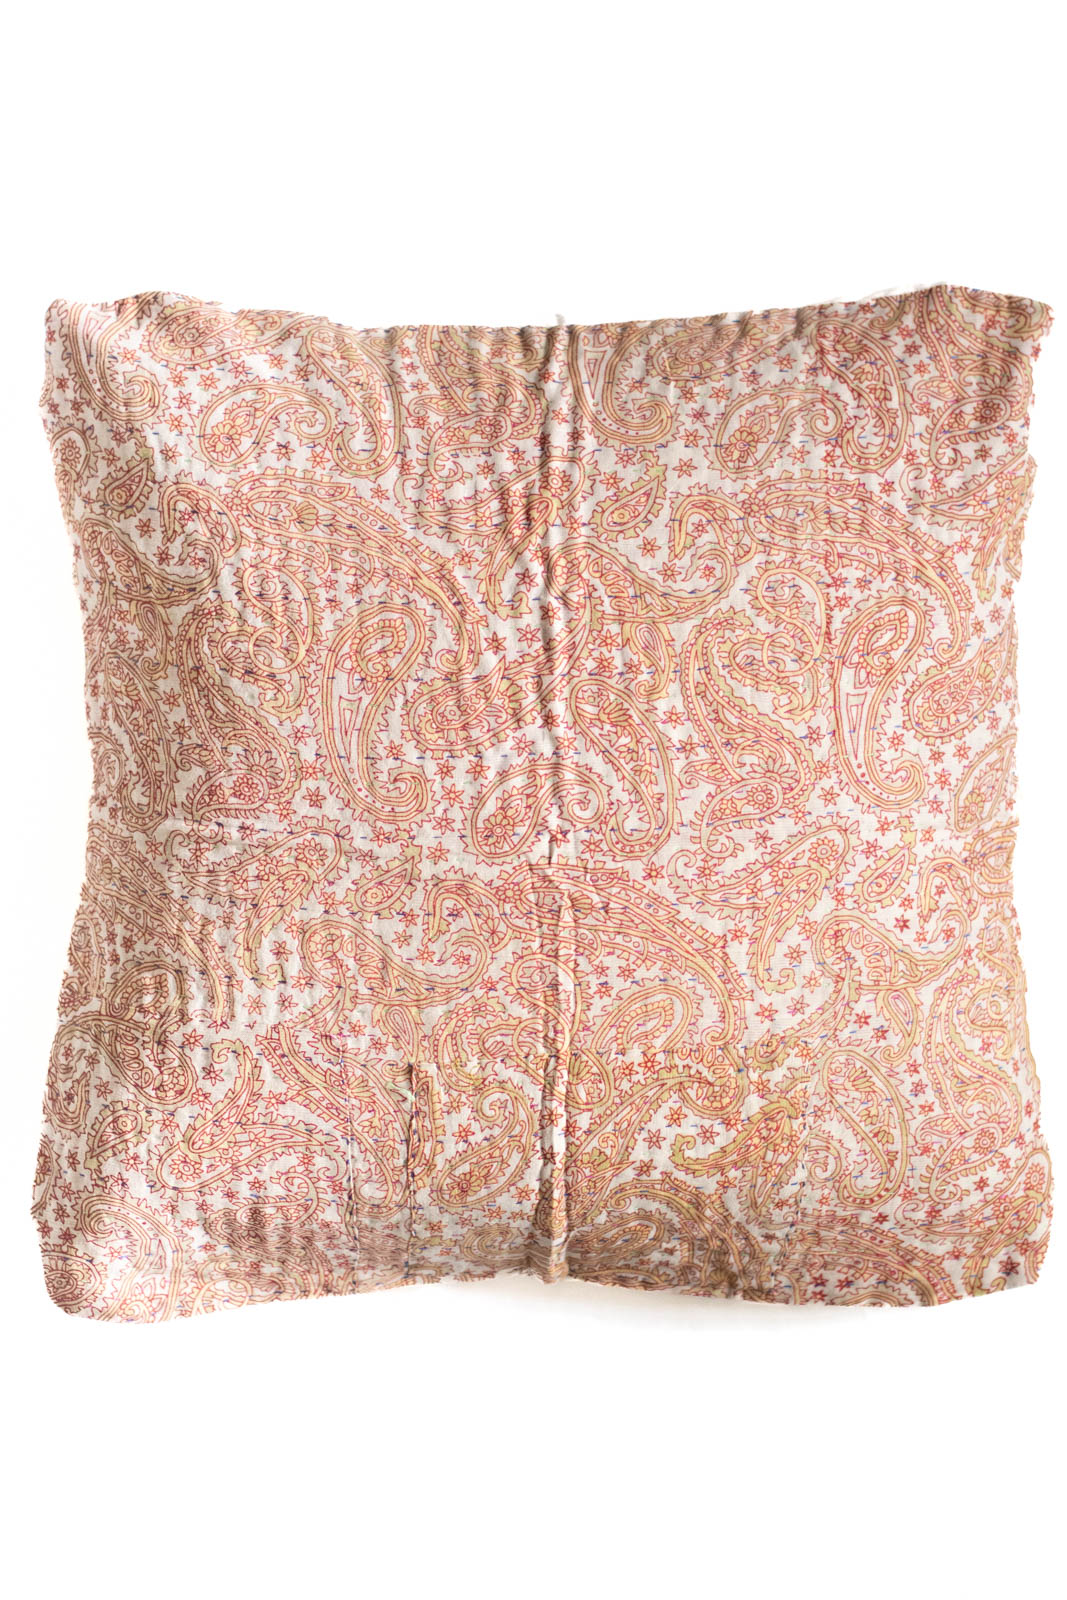 Worth no. 7 Kantha Pillow Cover